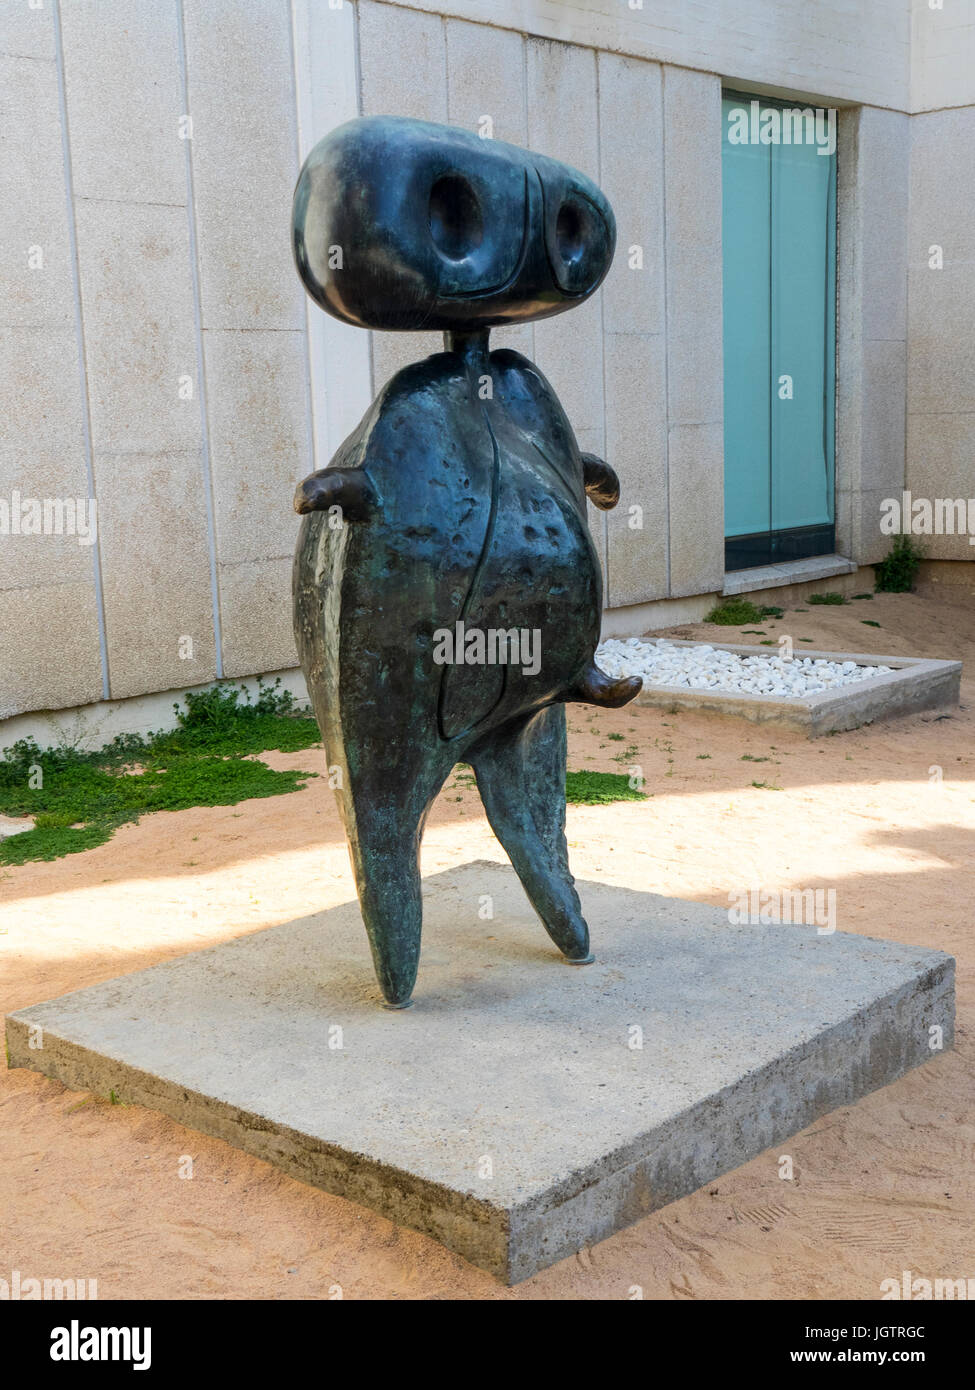 Personage 1970, a bronze sculpture by Joan Miro, on display at the entrance to Fundacio Joan Miro museum,Montjuic, Barcelona Spain. Stock Photo